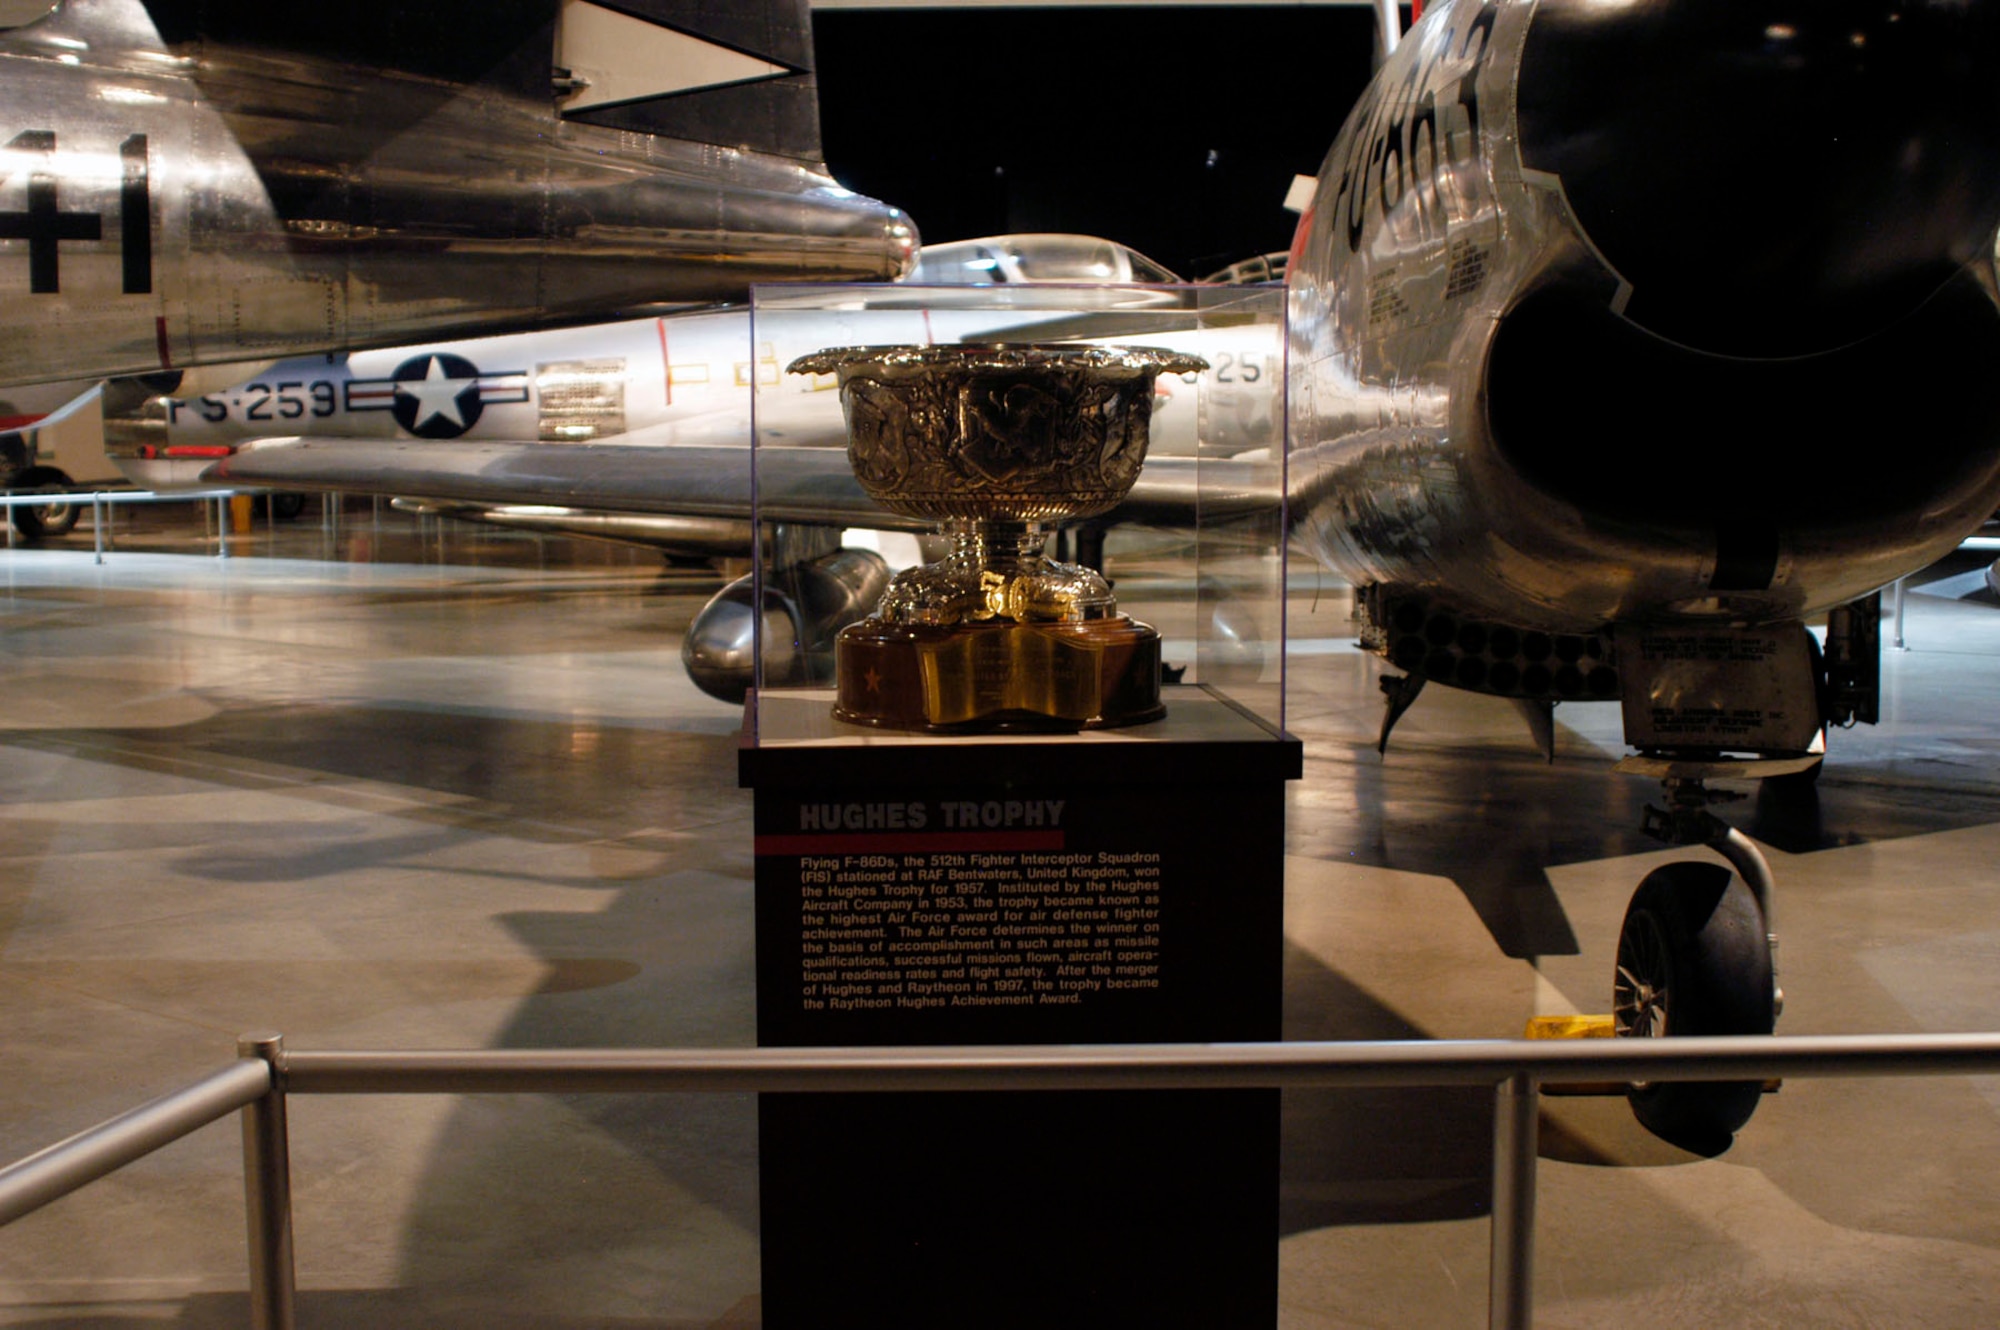 DAYTON, Ohio -- 1957 Hughes Trophy on display in the Cold War Gallery at the National Museum of the United States Air Force. (U.S. Air Force photo)